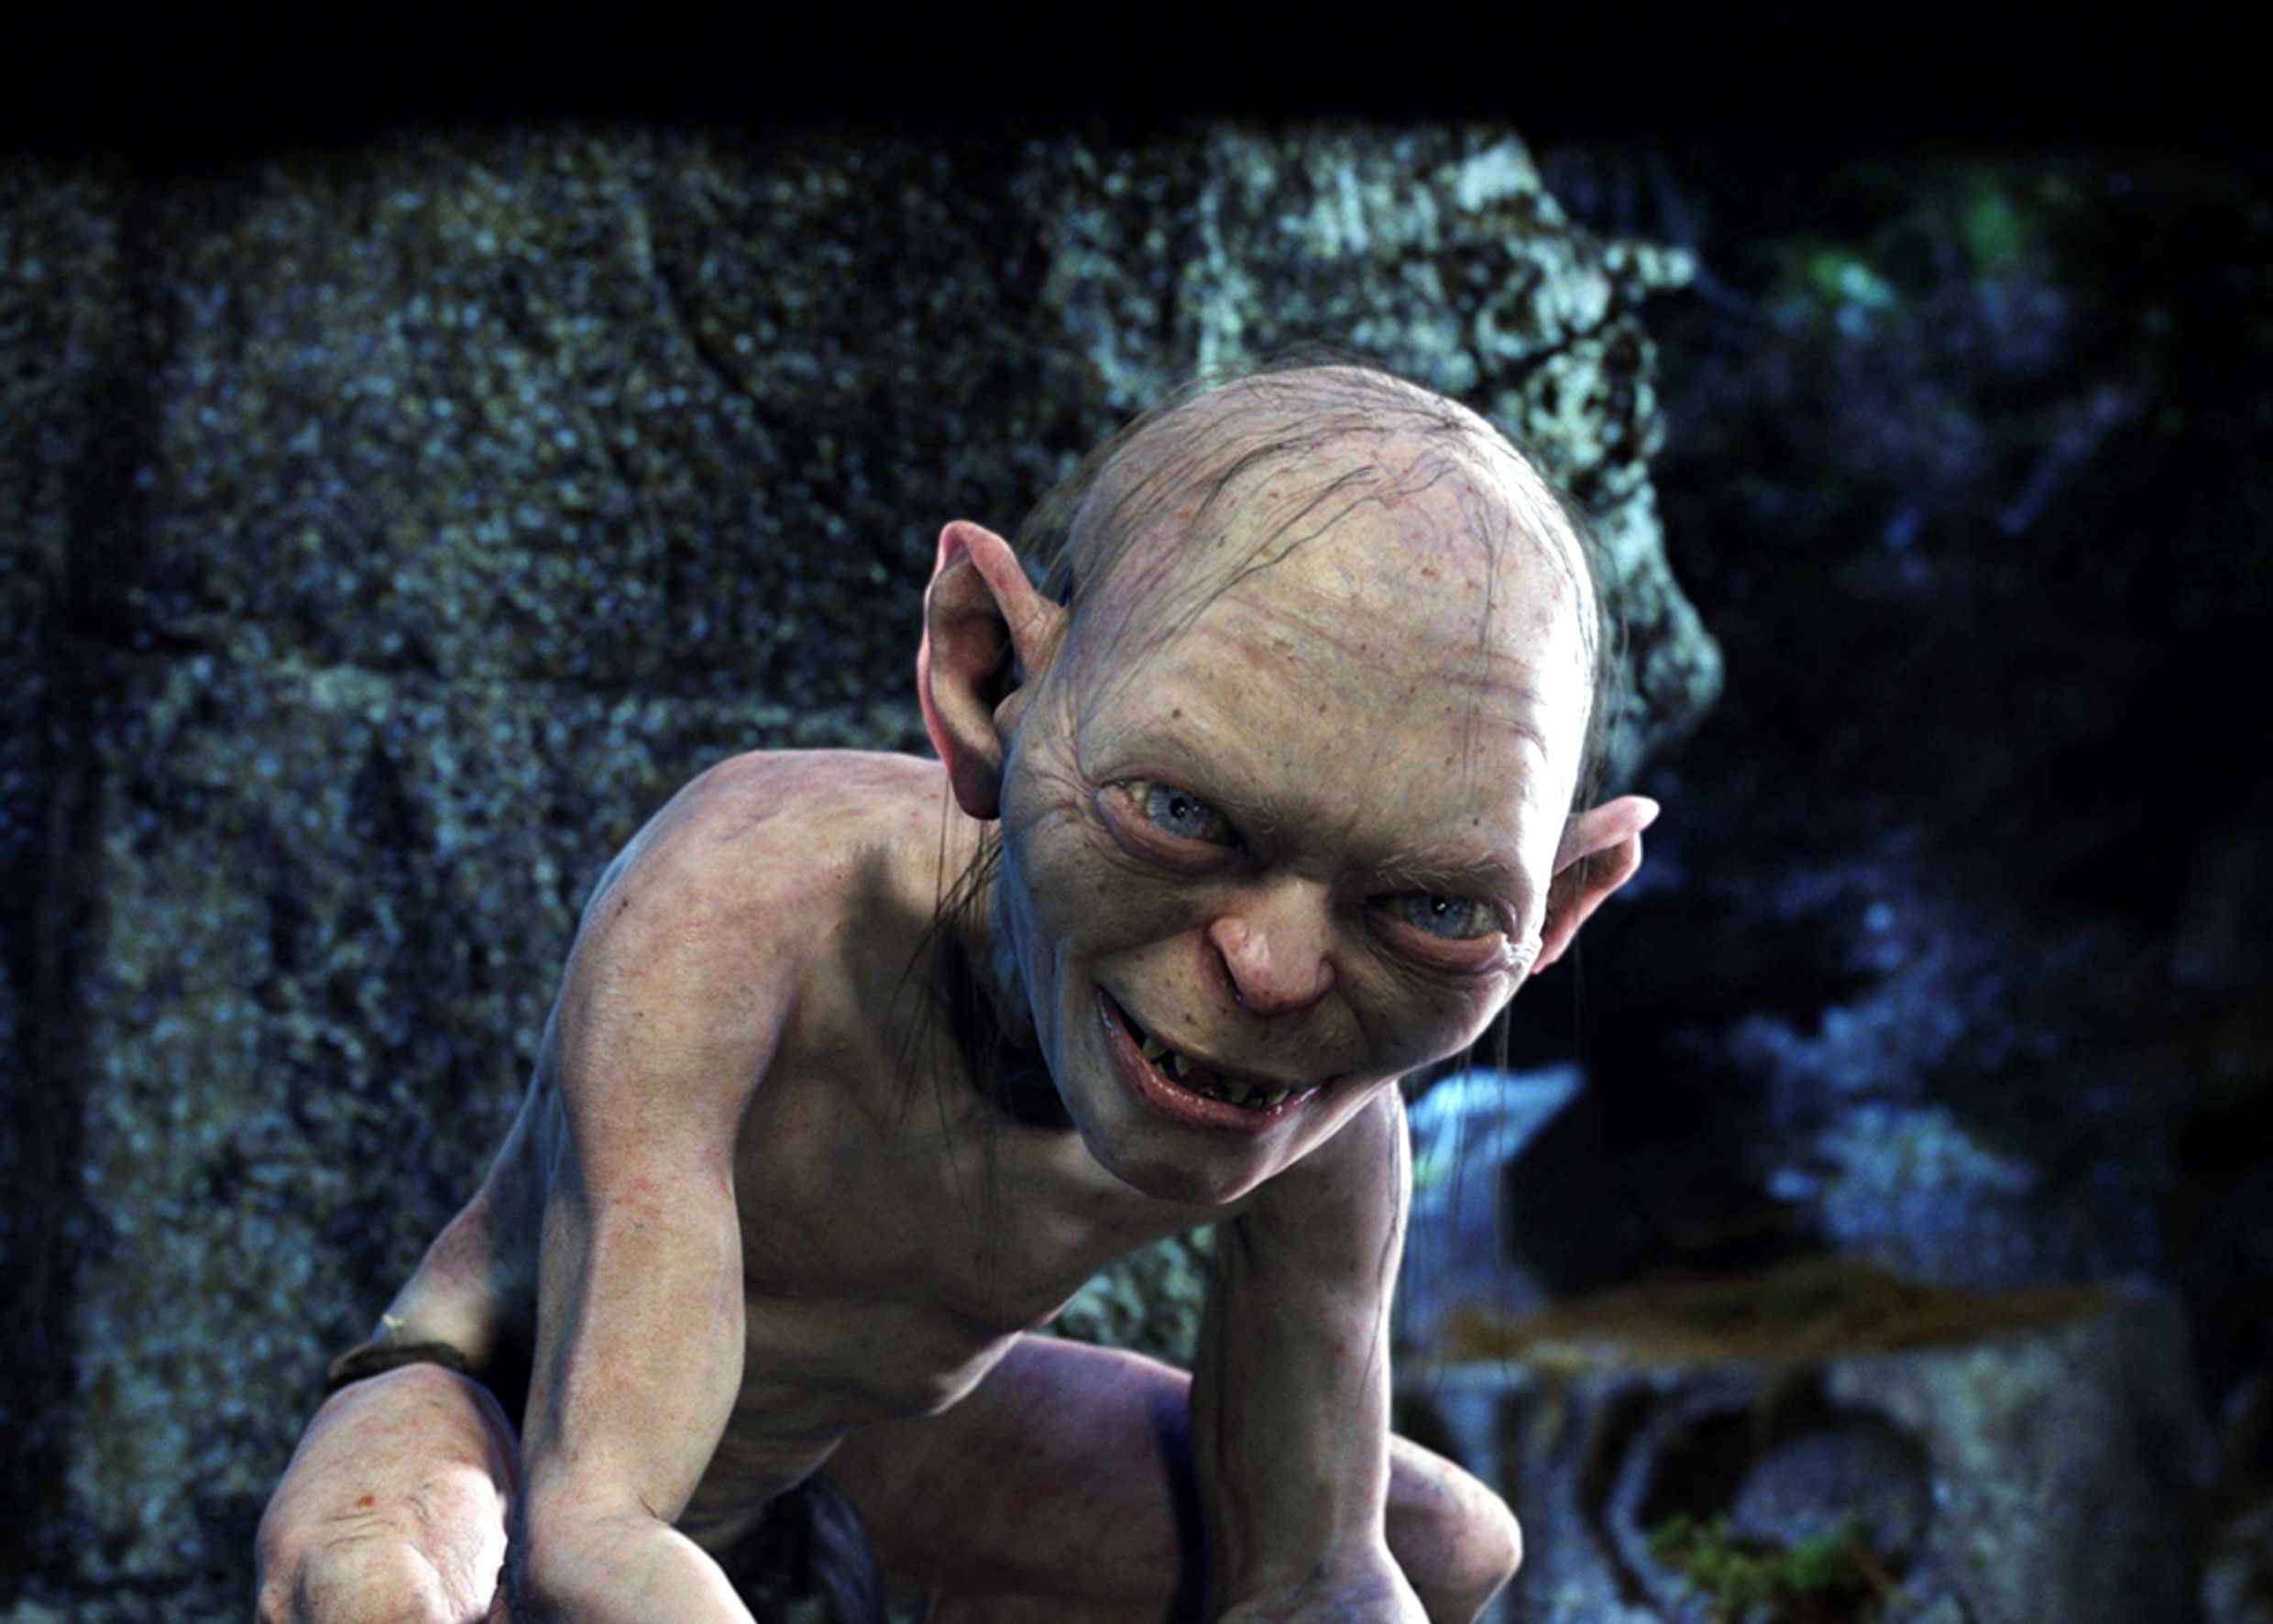 Lord of the Rings: Gollum' video game confirms release date